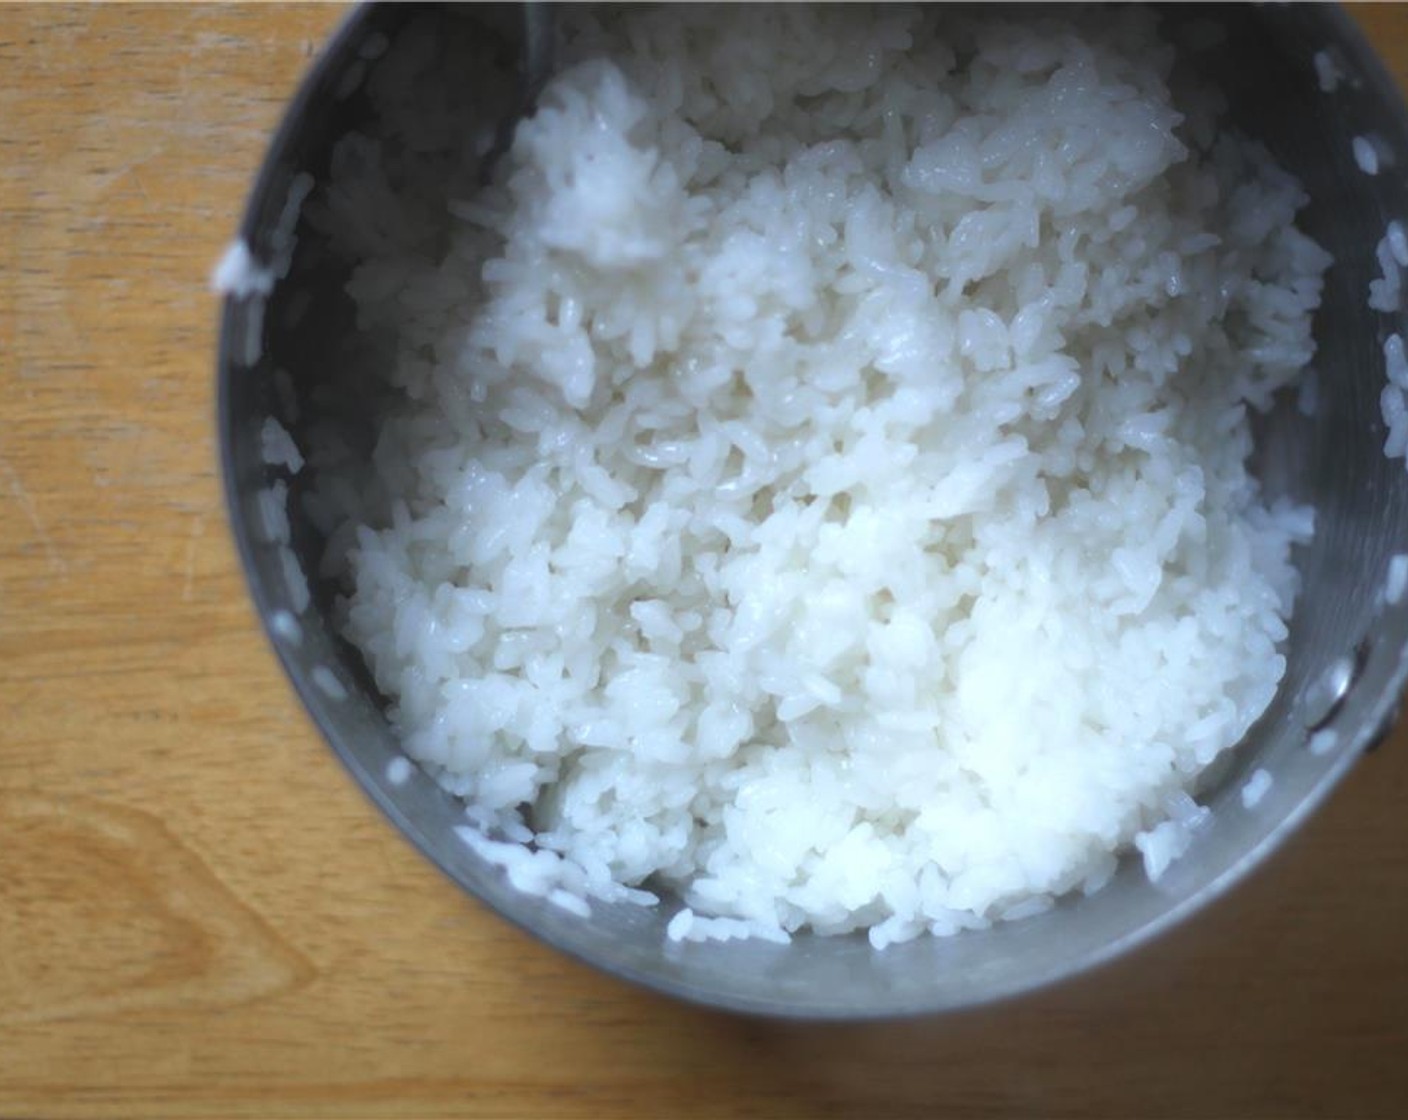 step 7 When the rice has cooled a bit, dissolve the Granulated Sugar (1 Tbsp) and Salt (1/2 tsp) in the Rice Vinegar (2 Tbsp) and add the solution to the rice. Fluff with a fork until the rice is evenly coated.